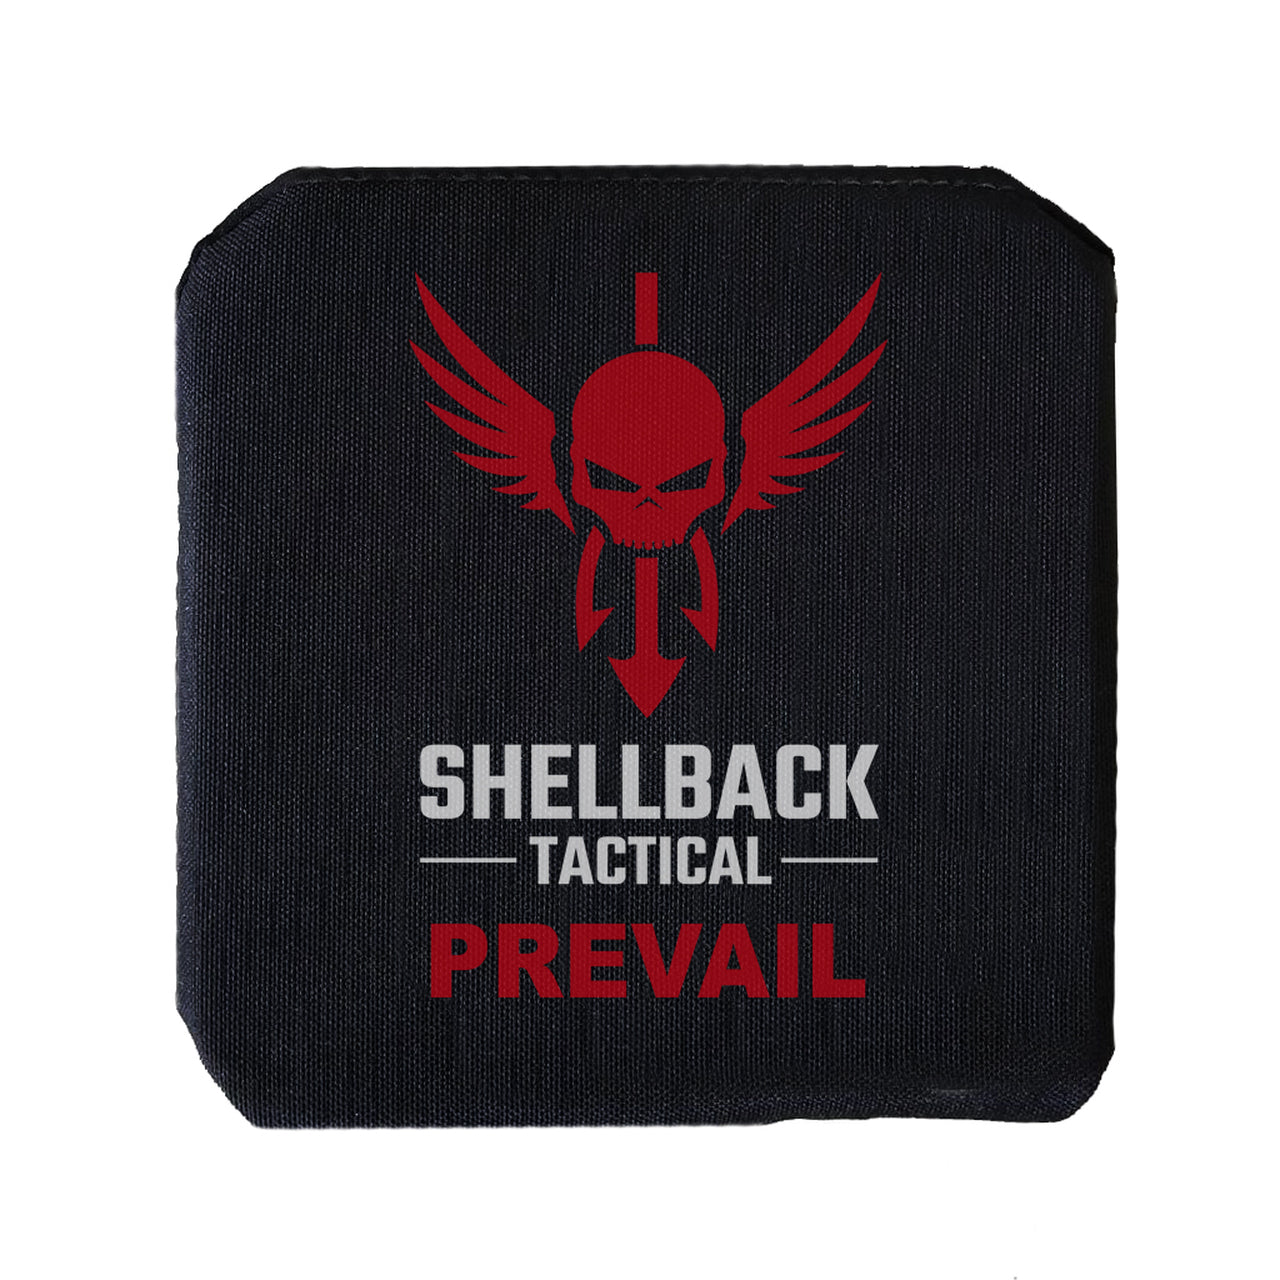 Shellback Tactical Prevail Series Level IV Single Curve 6 x 6 Hard Armor Plate, designed by Shellback Tactical, offers advanced level IV protection with the addition of side plates, ensuring the highest degree of safety and durability. This coaster excels in providing Shellback Tactical Prevail Series Level IV Single Curve 6 x 6 Hard Armor Plate.